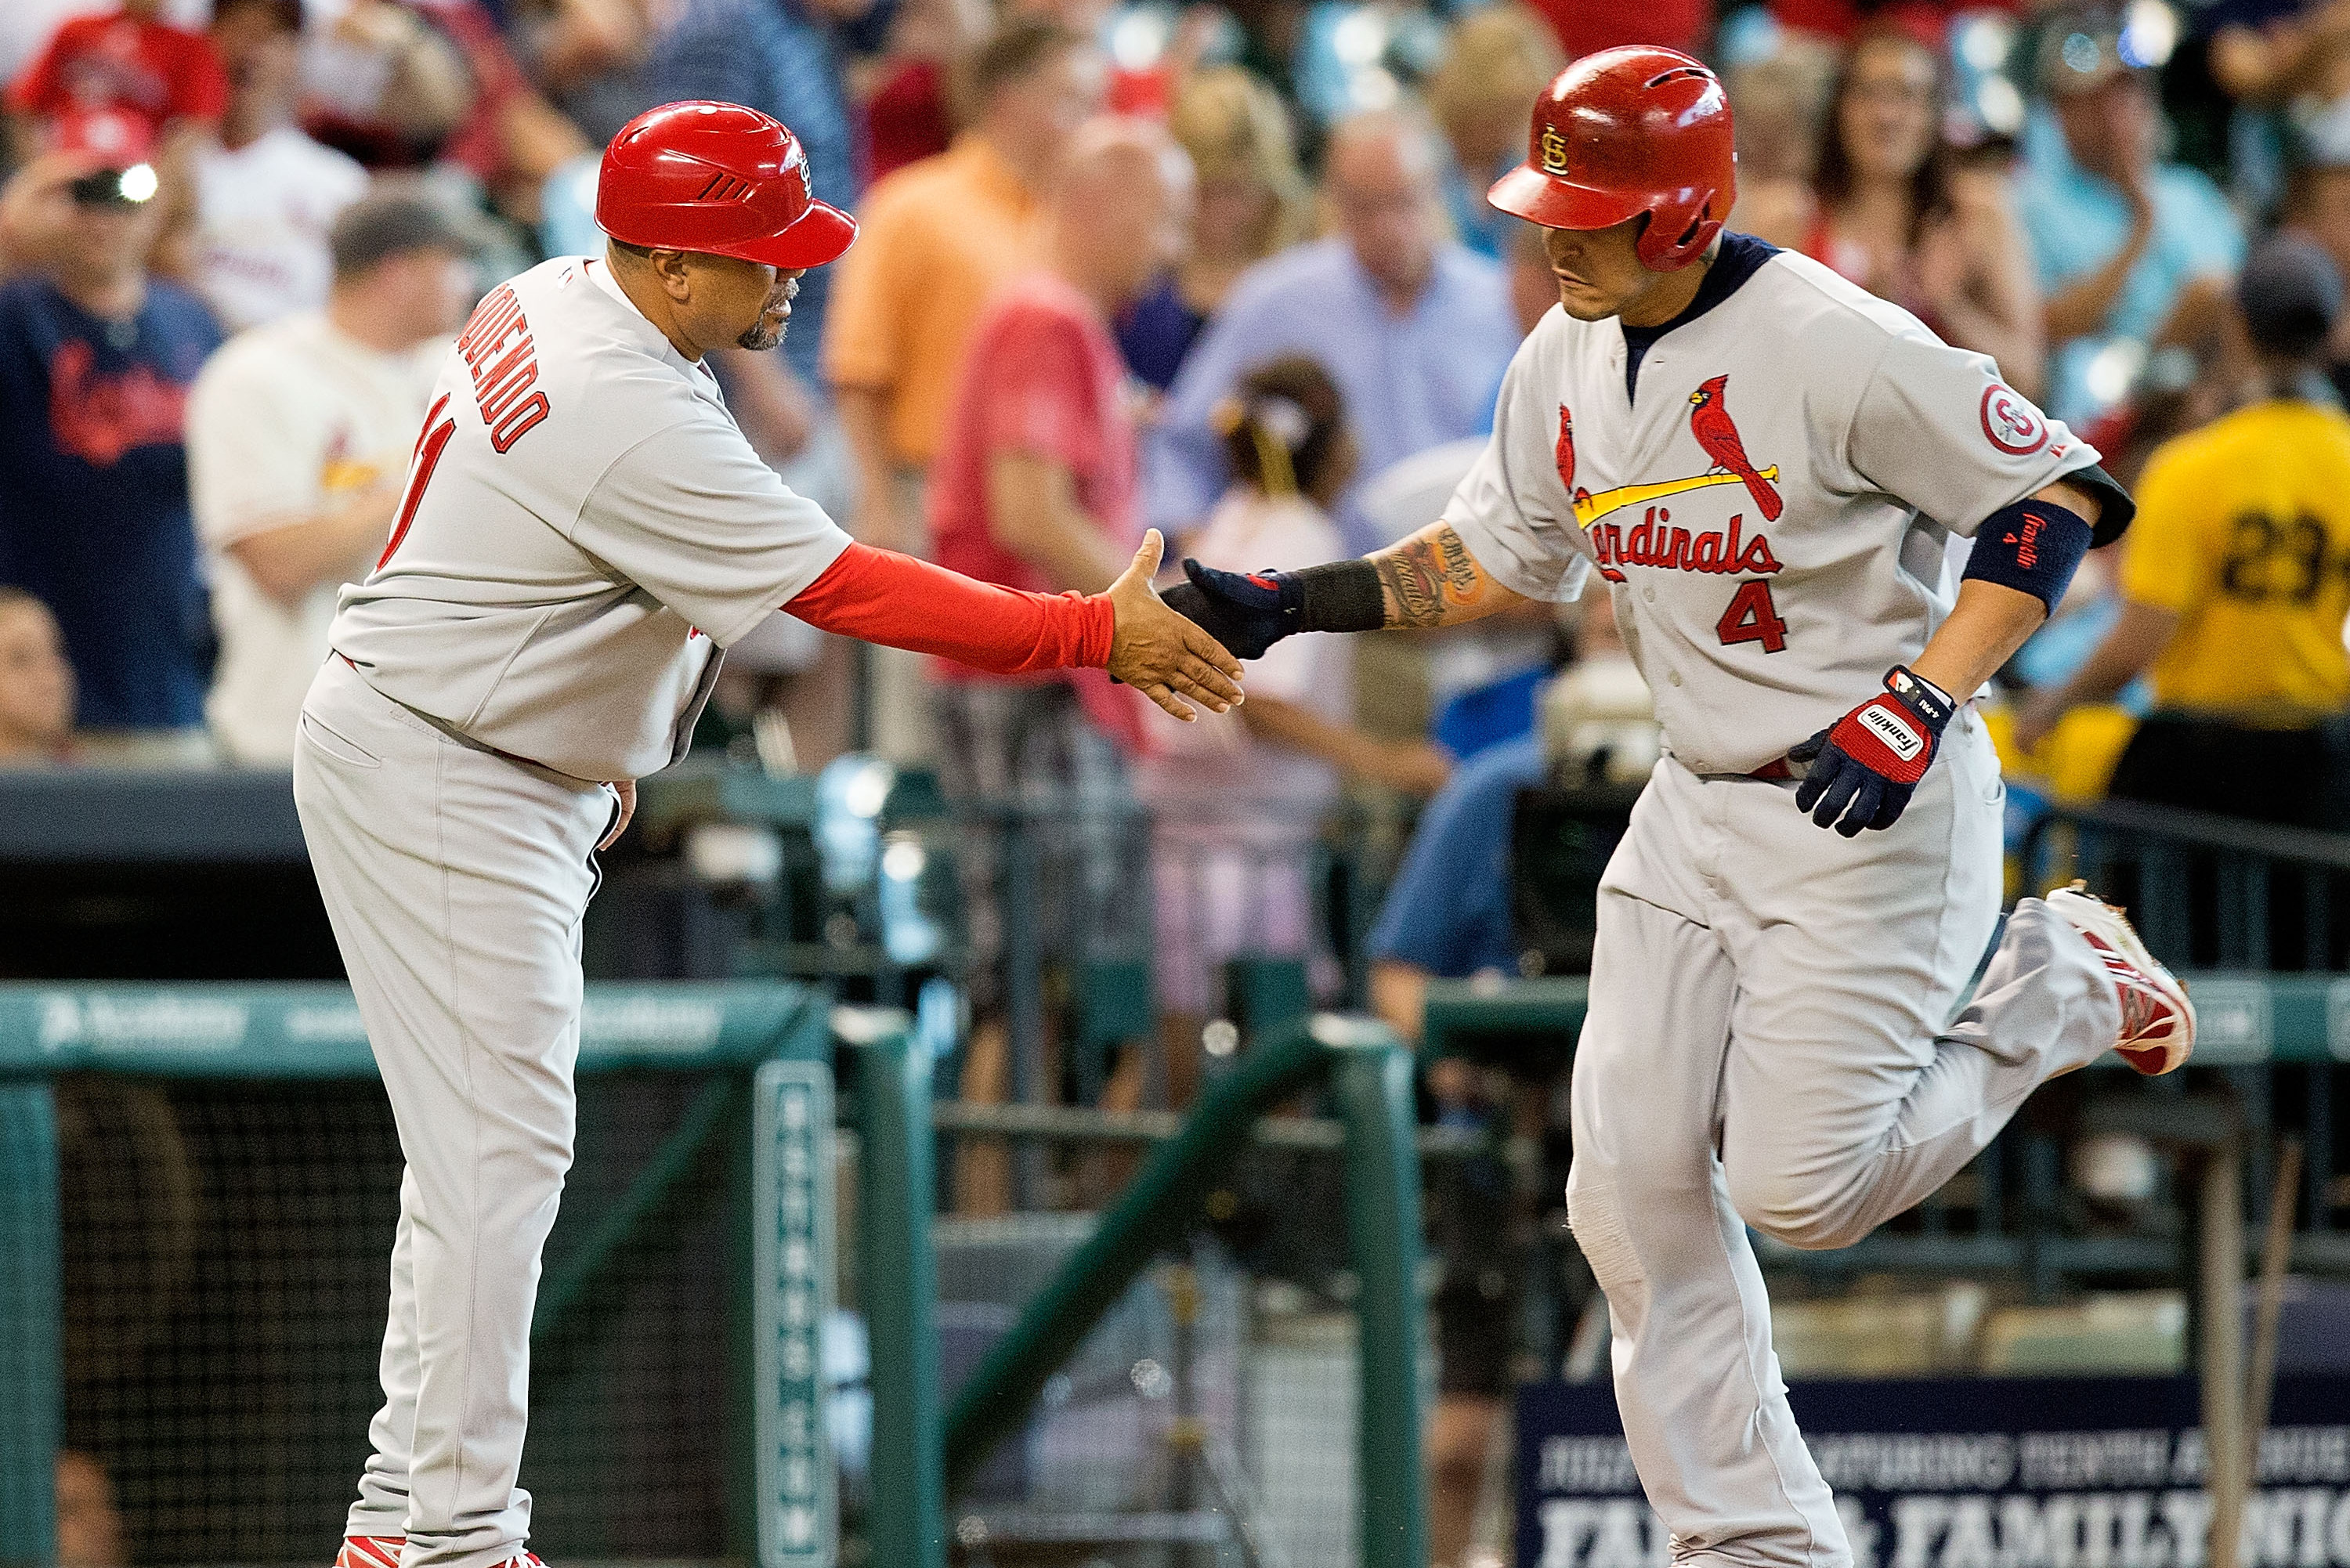 Yadier Molina: Something is cooking in regards to coaching for